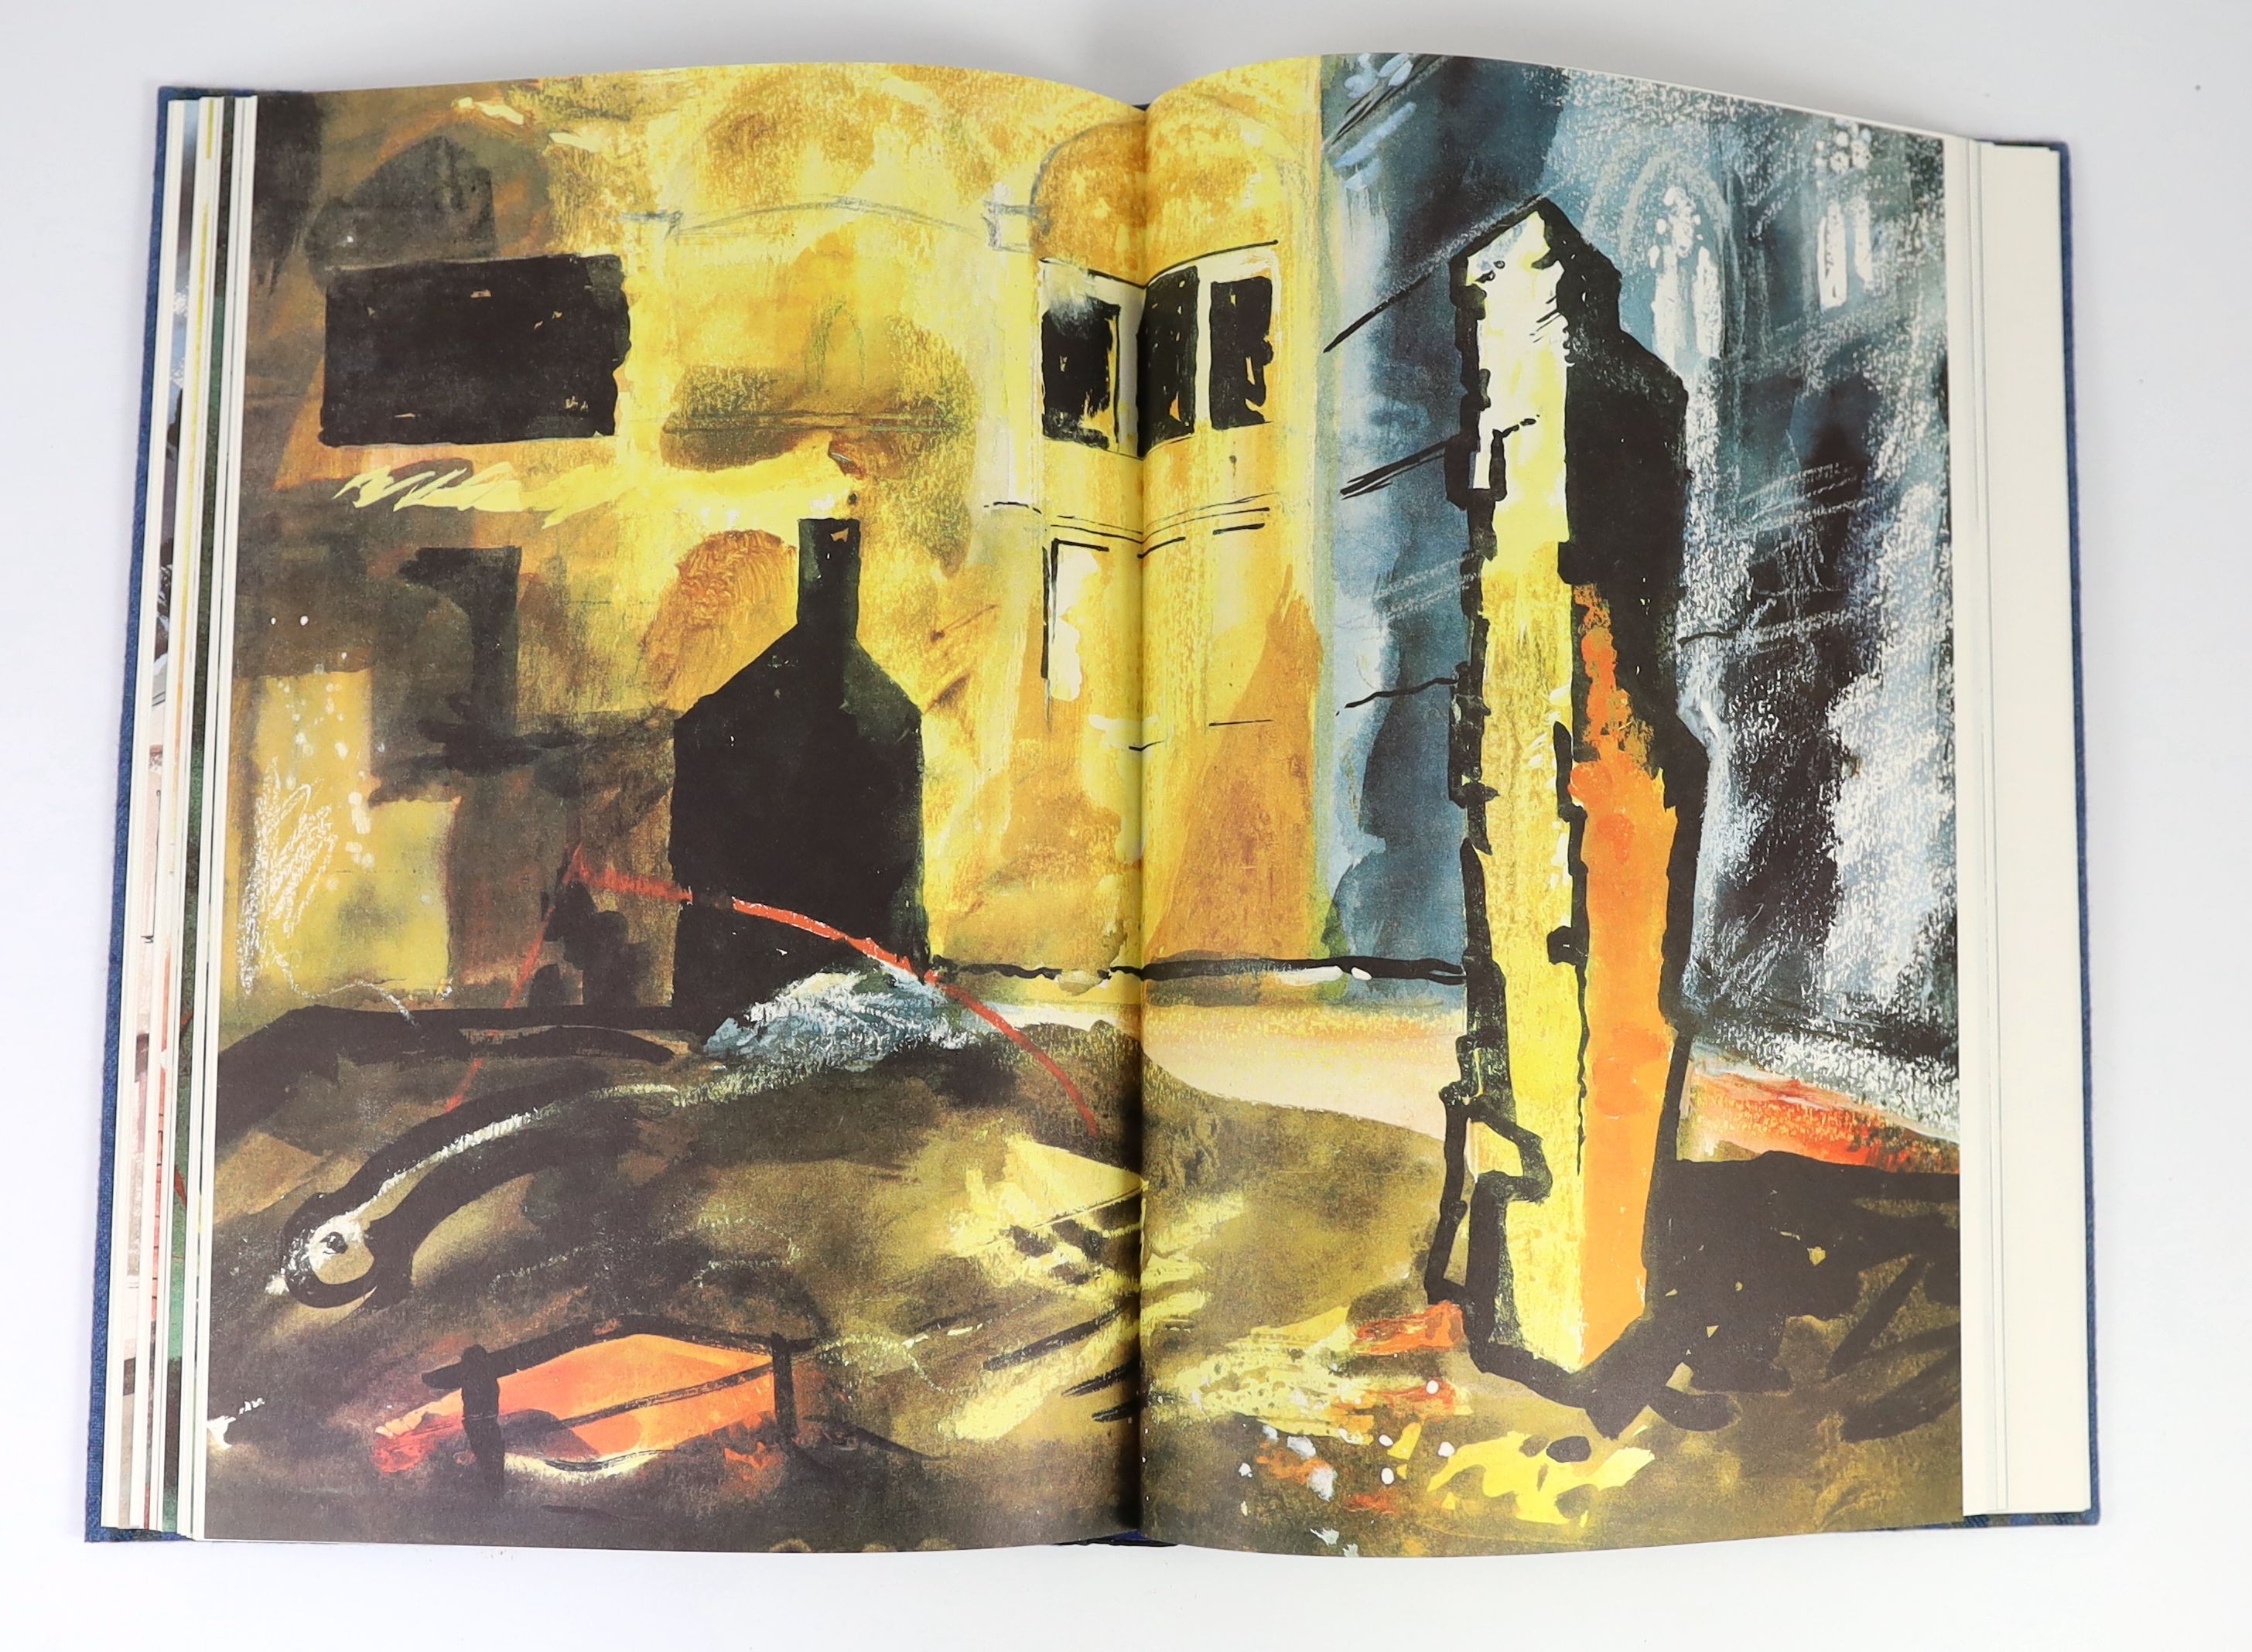 Thomas, Dylan - Deaths and Entrances, one of 250, edited by Walford Davies, illustrated by John Piper with 7 colour plates, folio, original morocco-backed cloth, Gwasg Gregynog, 1984, in slip case.